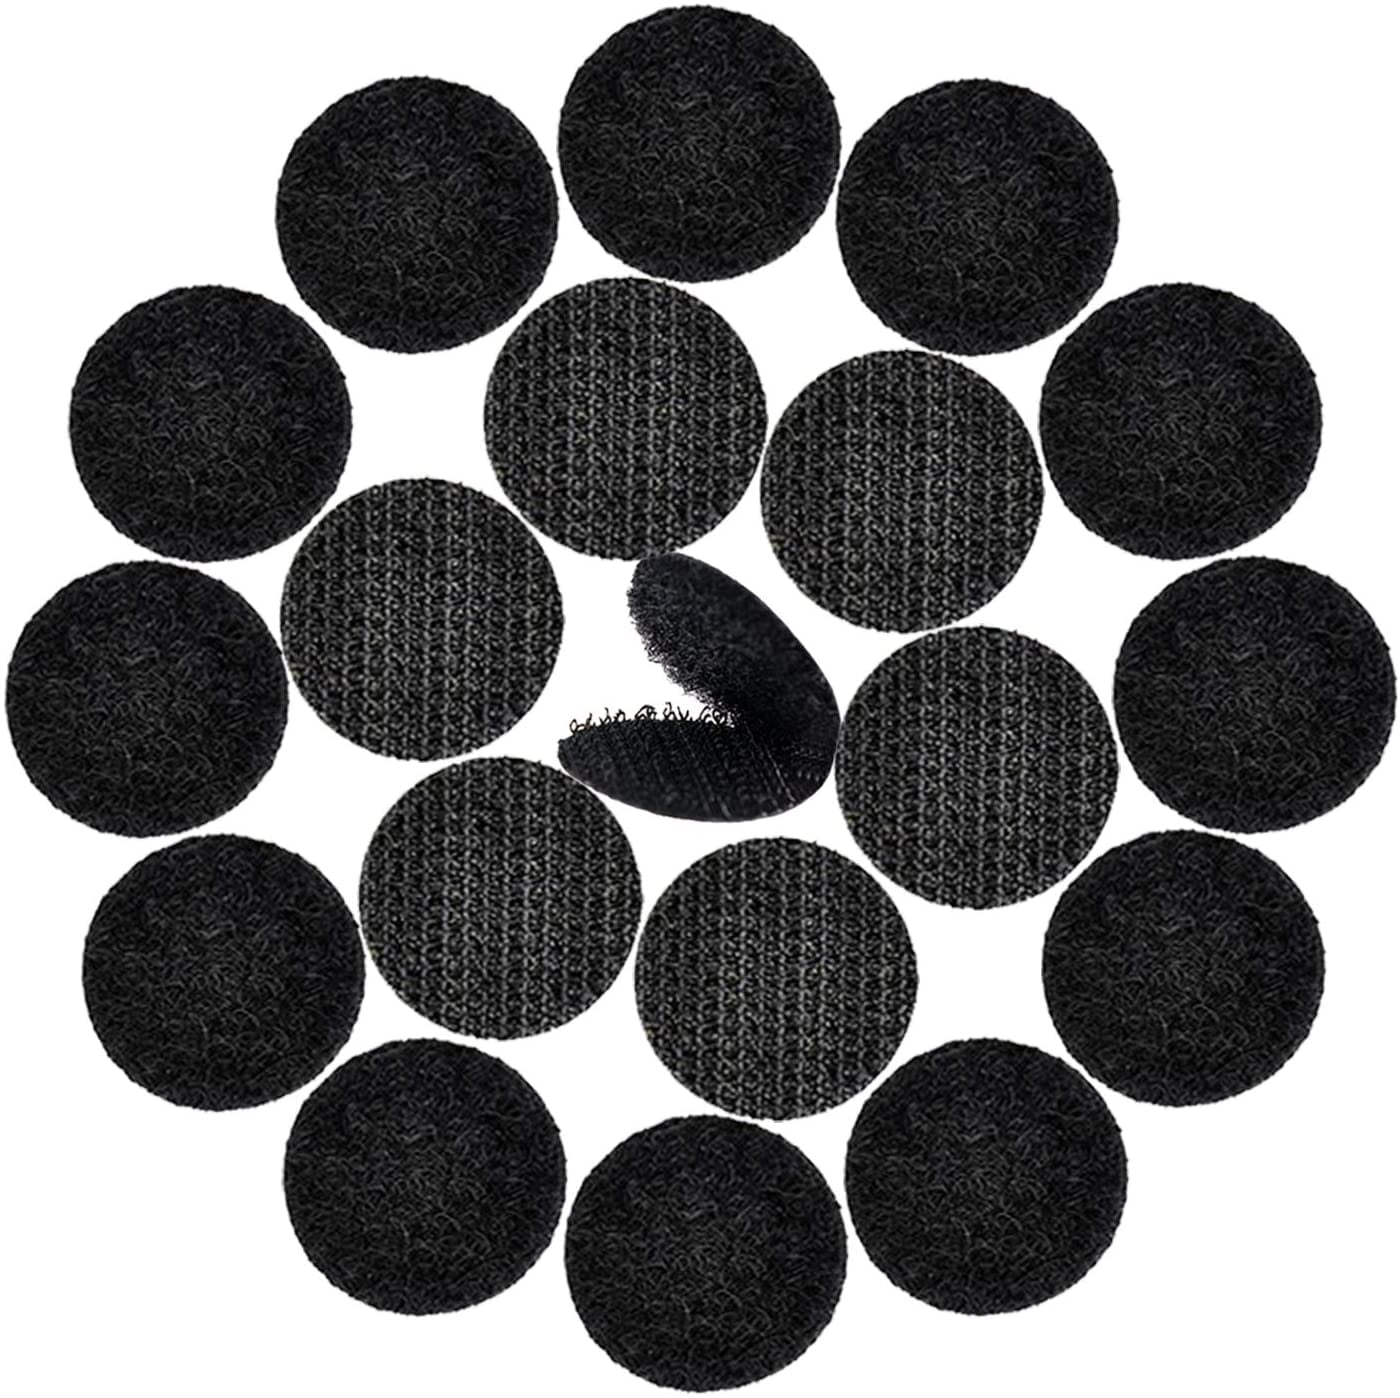 Home Office Black 256pcs Heavy Duty Hook and Loop Dots 1 inch in Diameter Self Adhesive Super Sticky Dots Fastening Mounting Double Sided Tape for School DIY Lover 